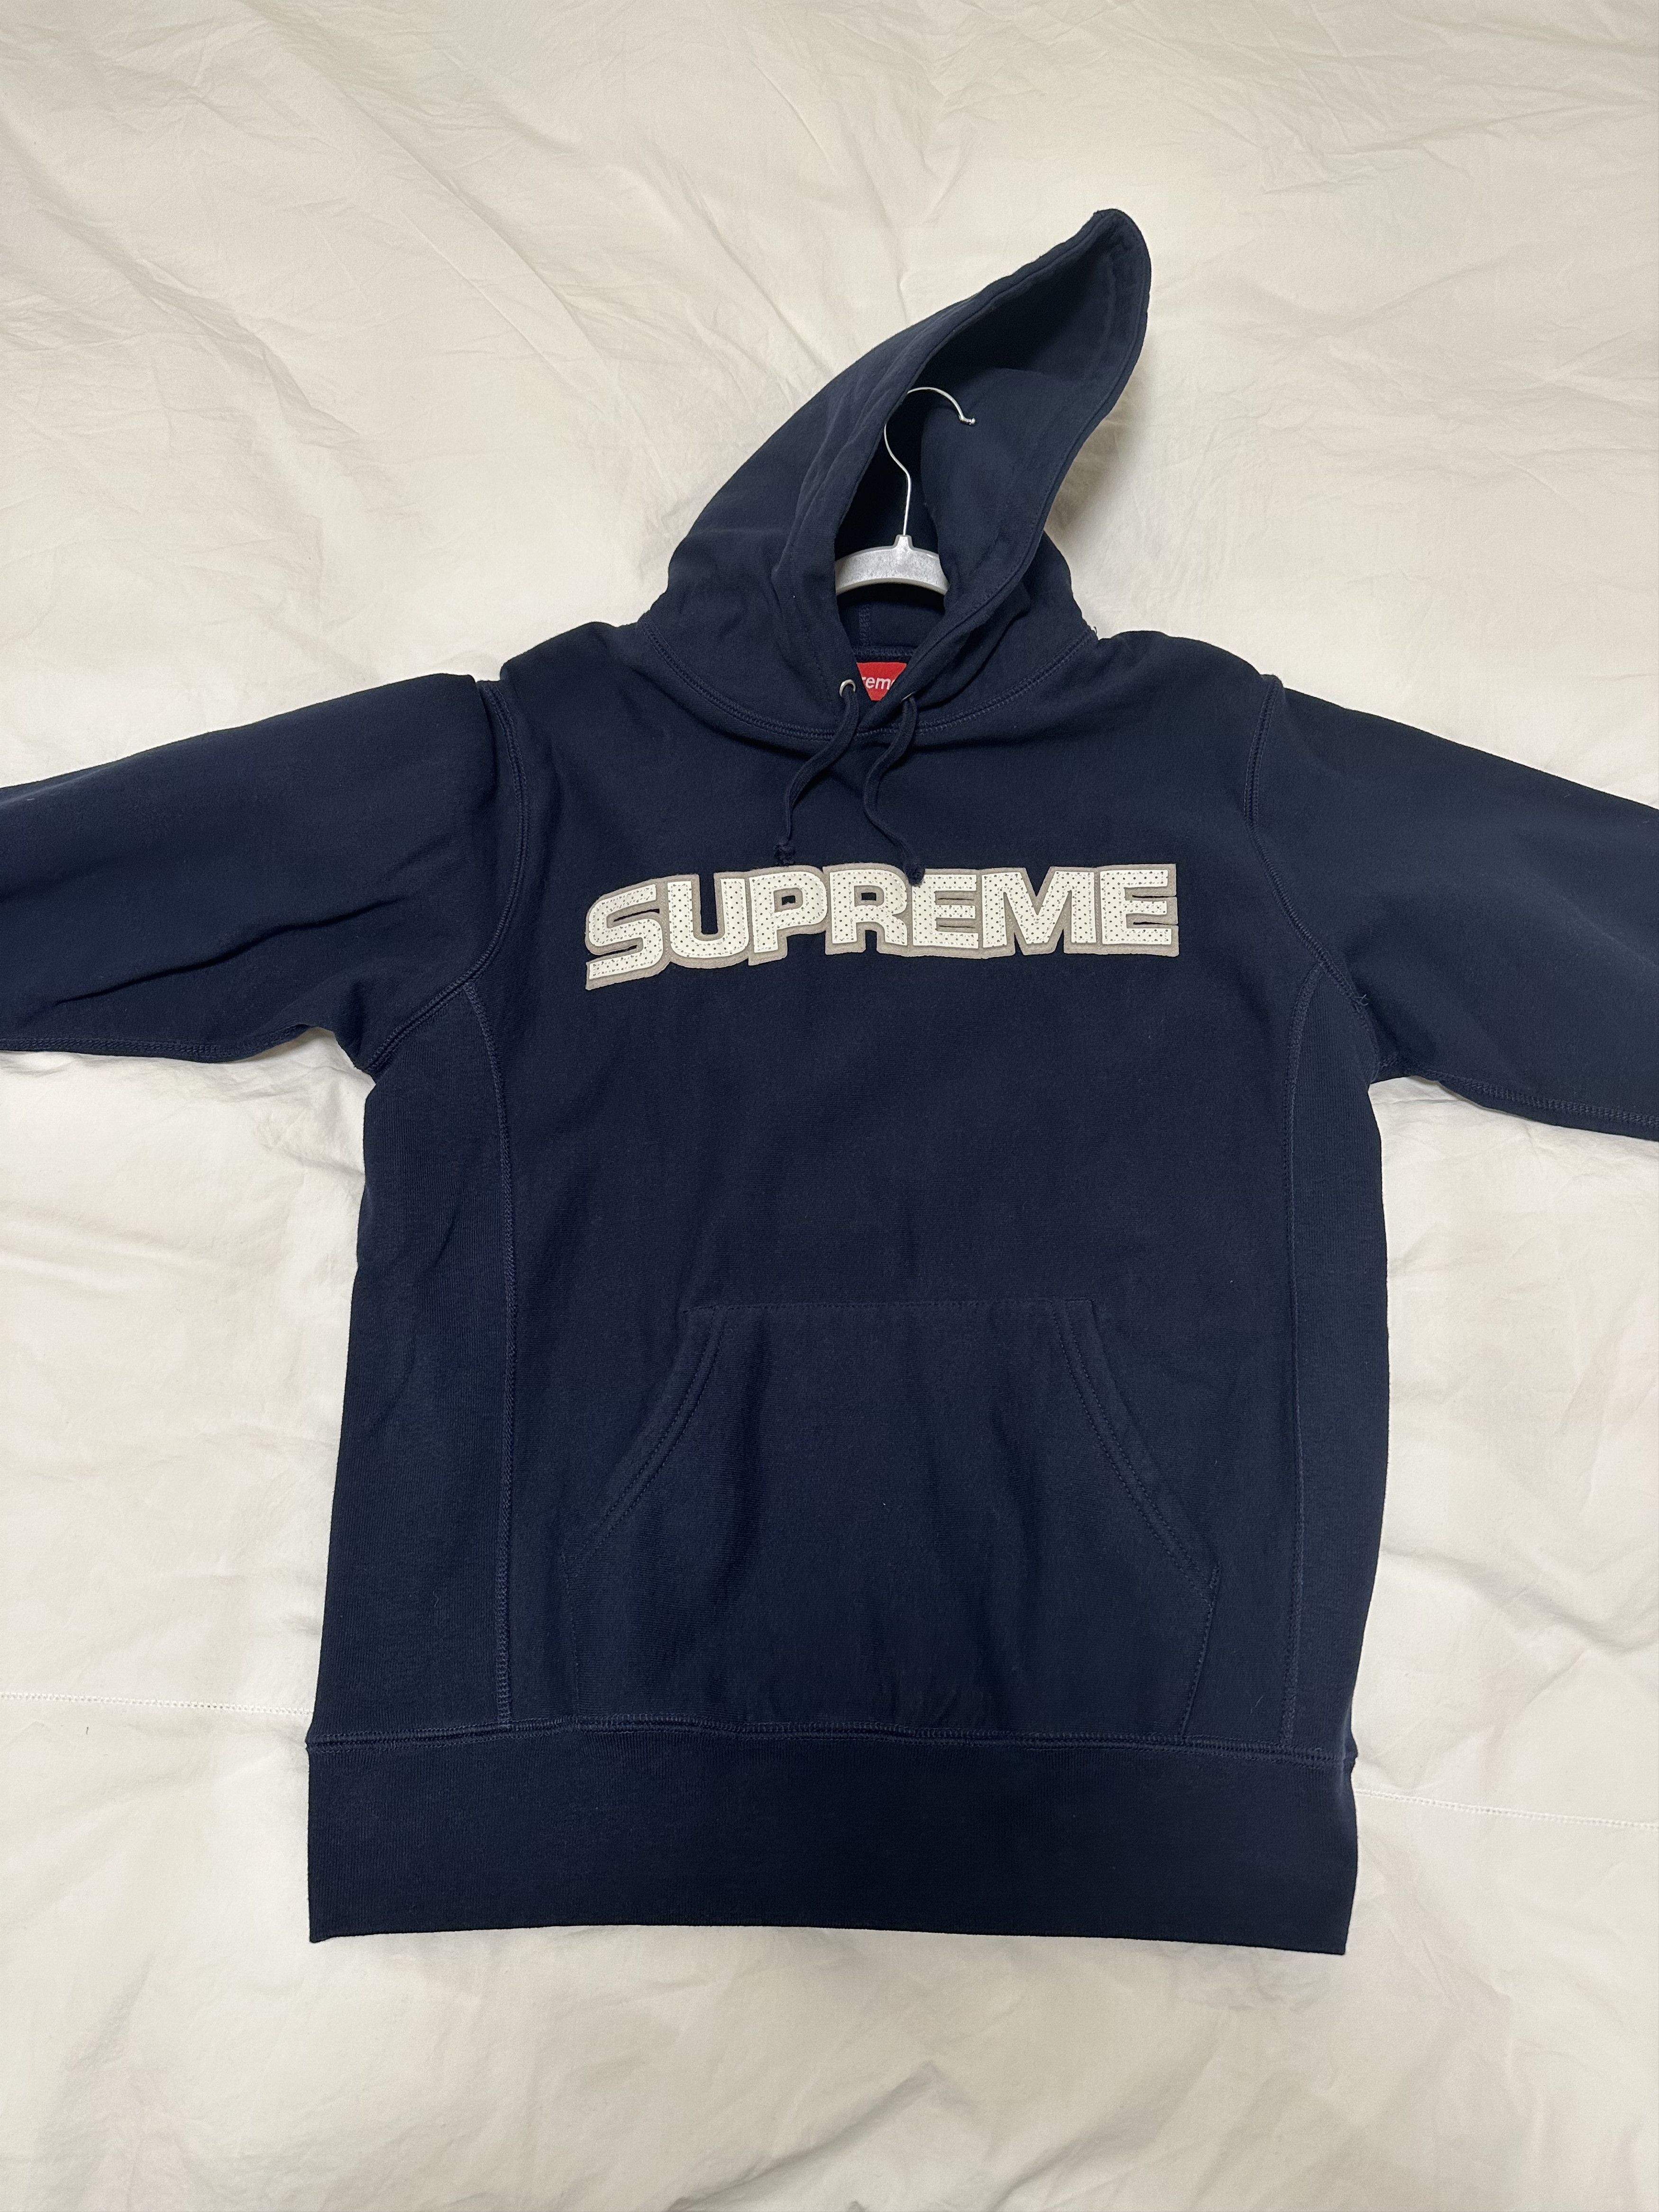 Supreme Perforated Leather Hooded Sweatshirt | Grailed